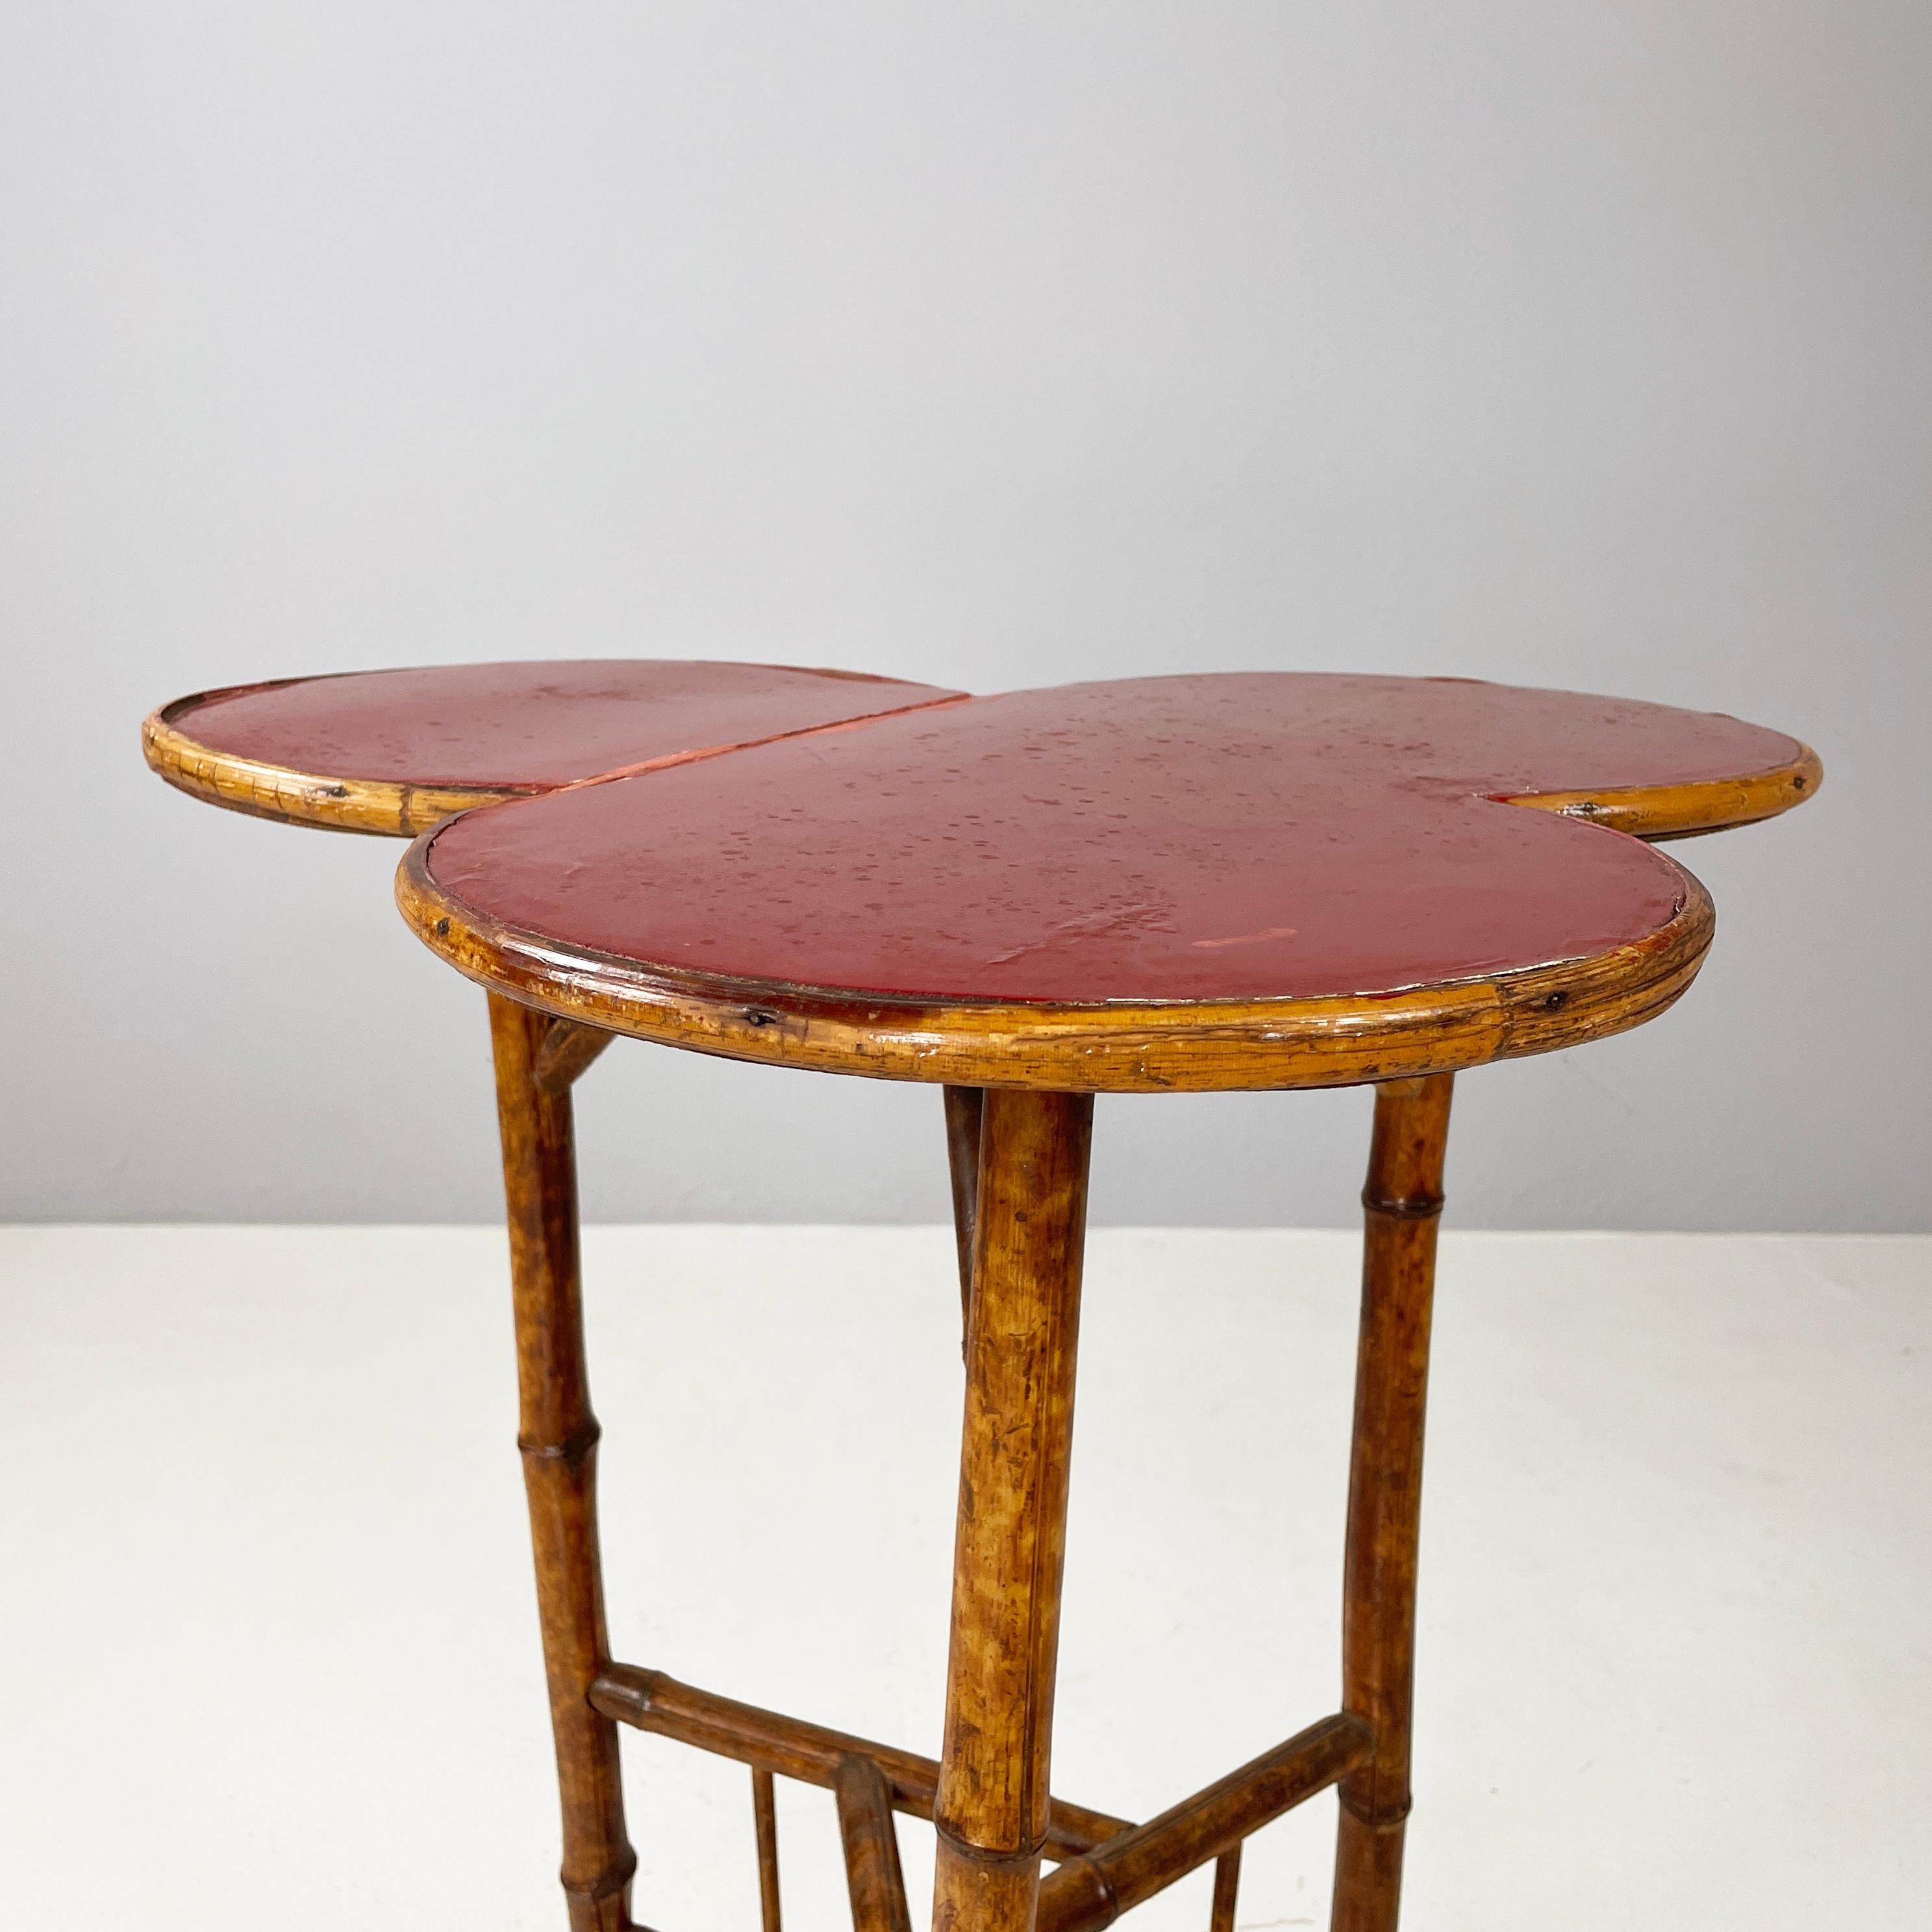 Italian art deco Coffee table with red wood clover top and bamboo, 1900-1950s For Sale 6